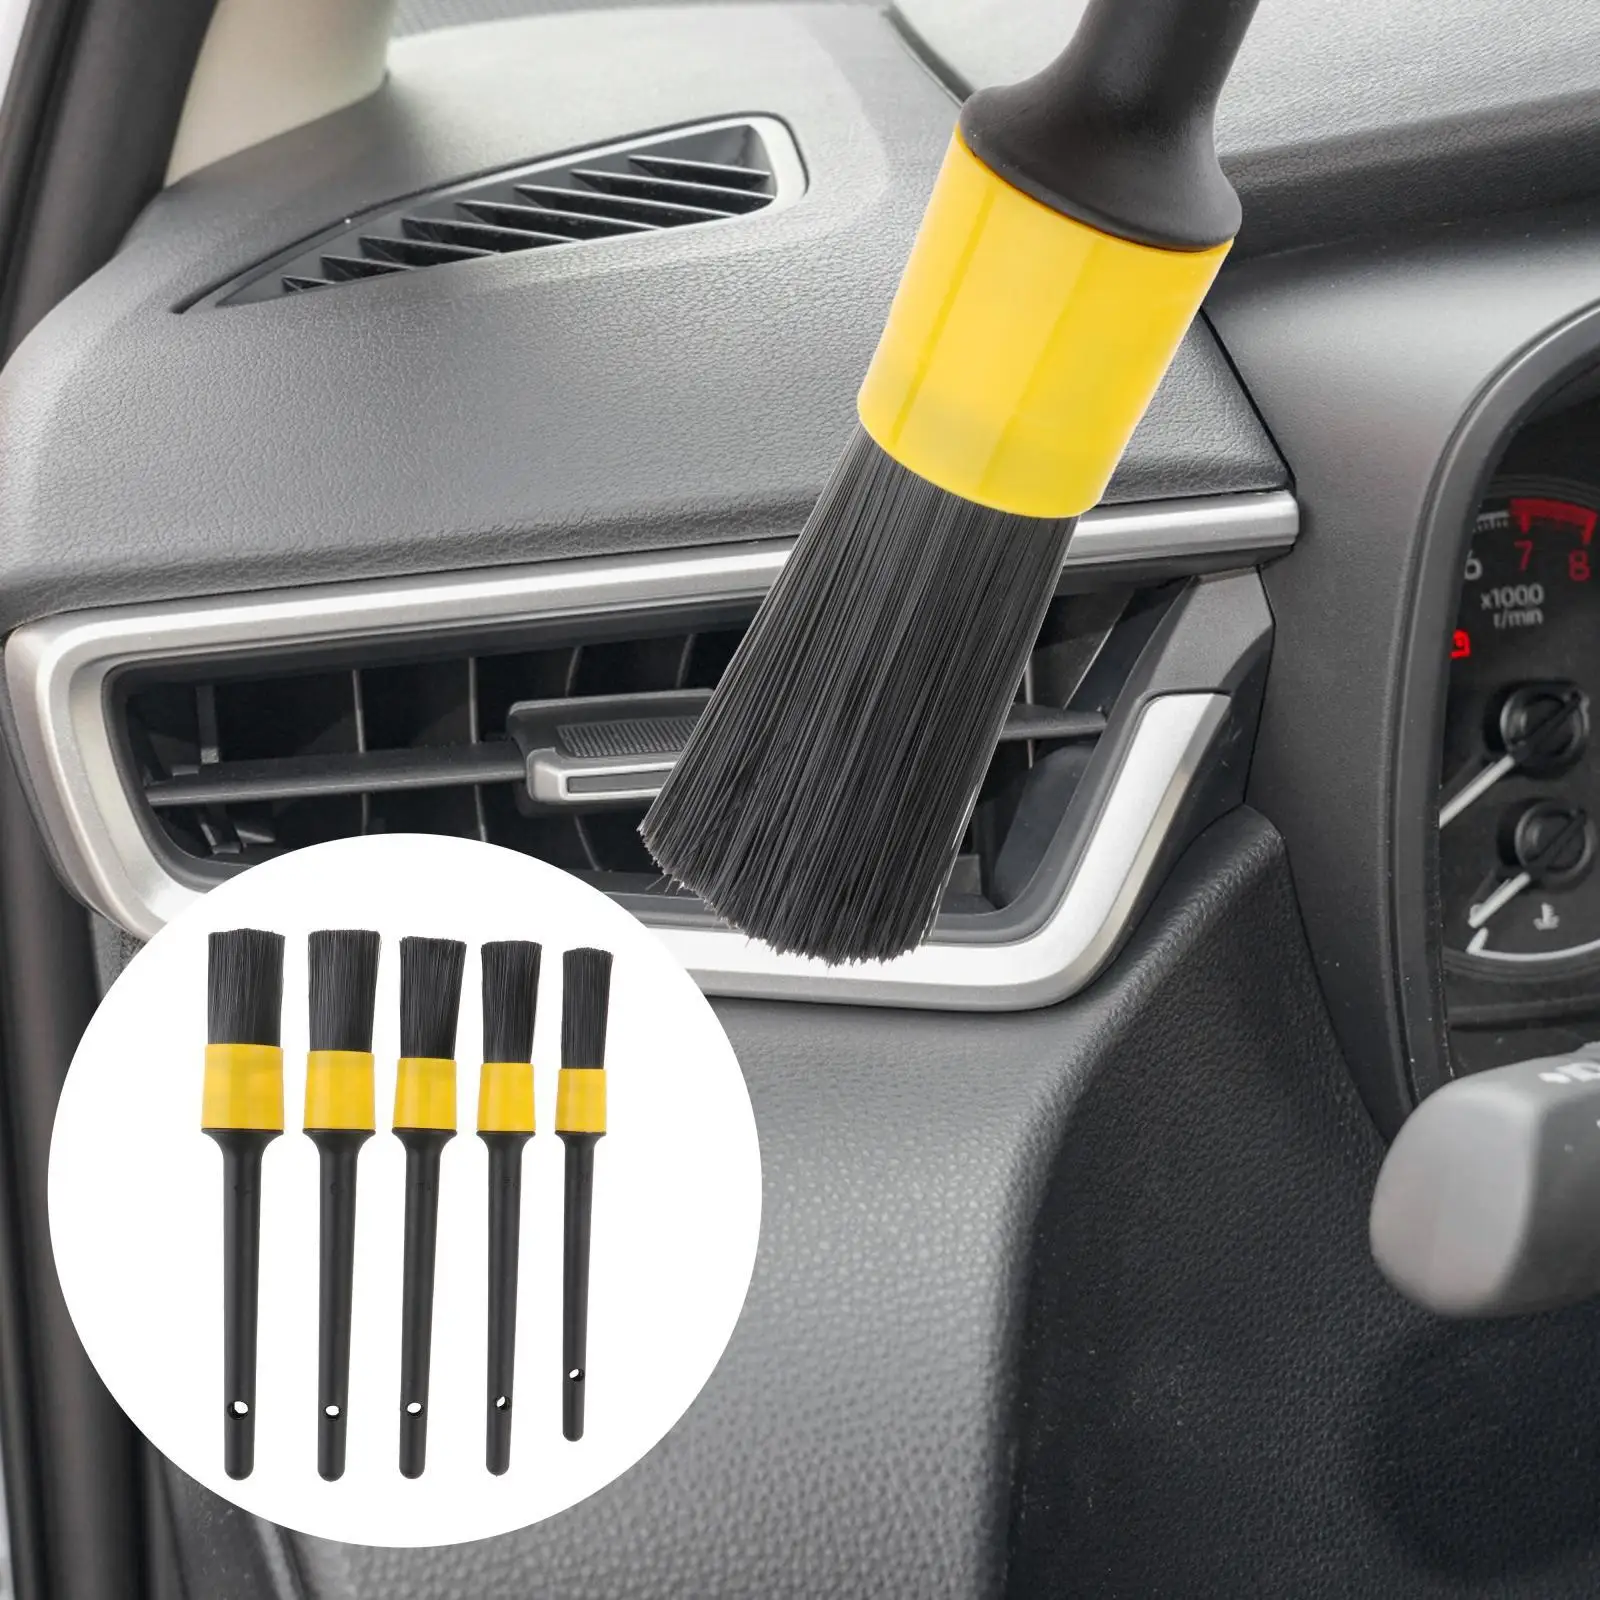 5 Pieces Auto Car Detailing Brush Set for Cleaning Interior Air Vent